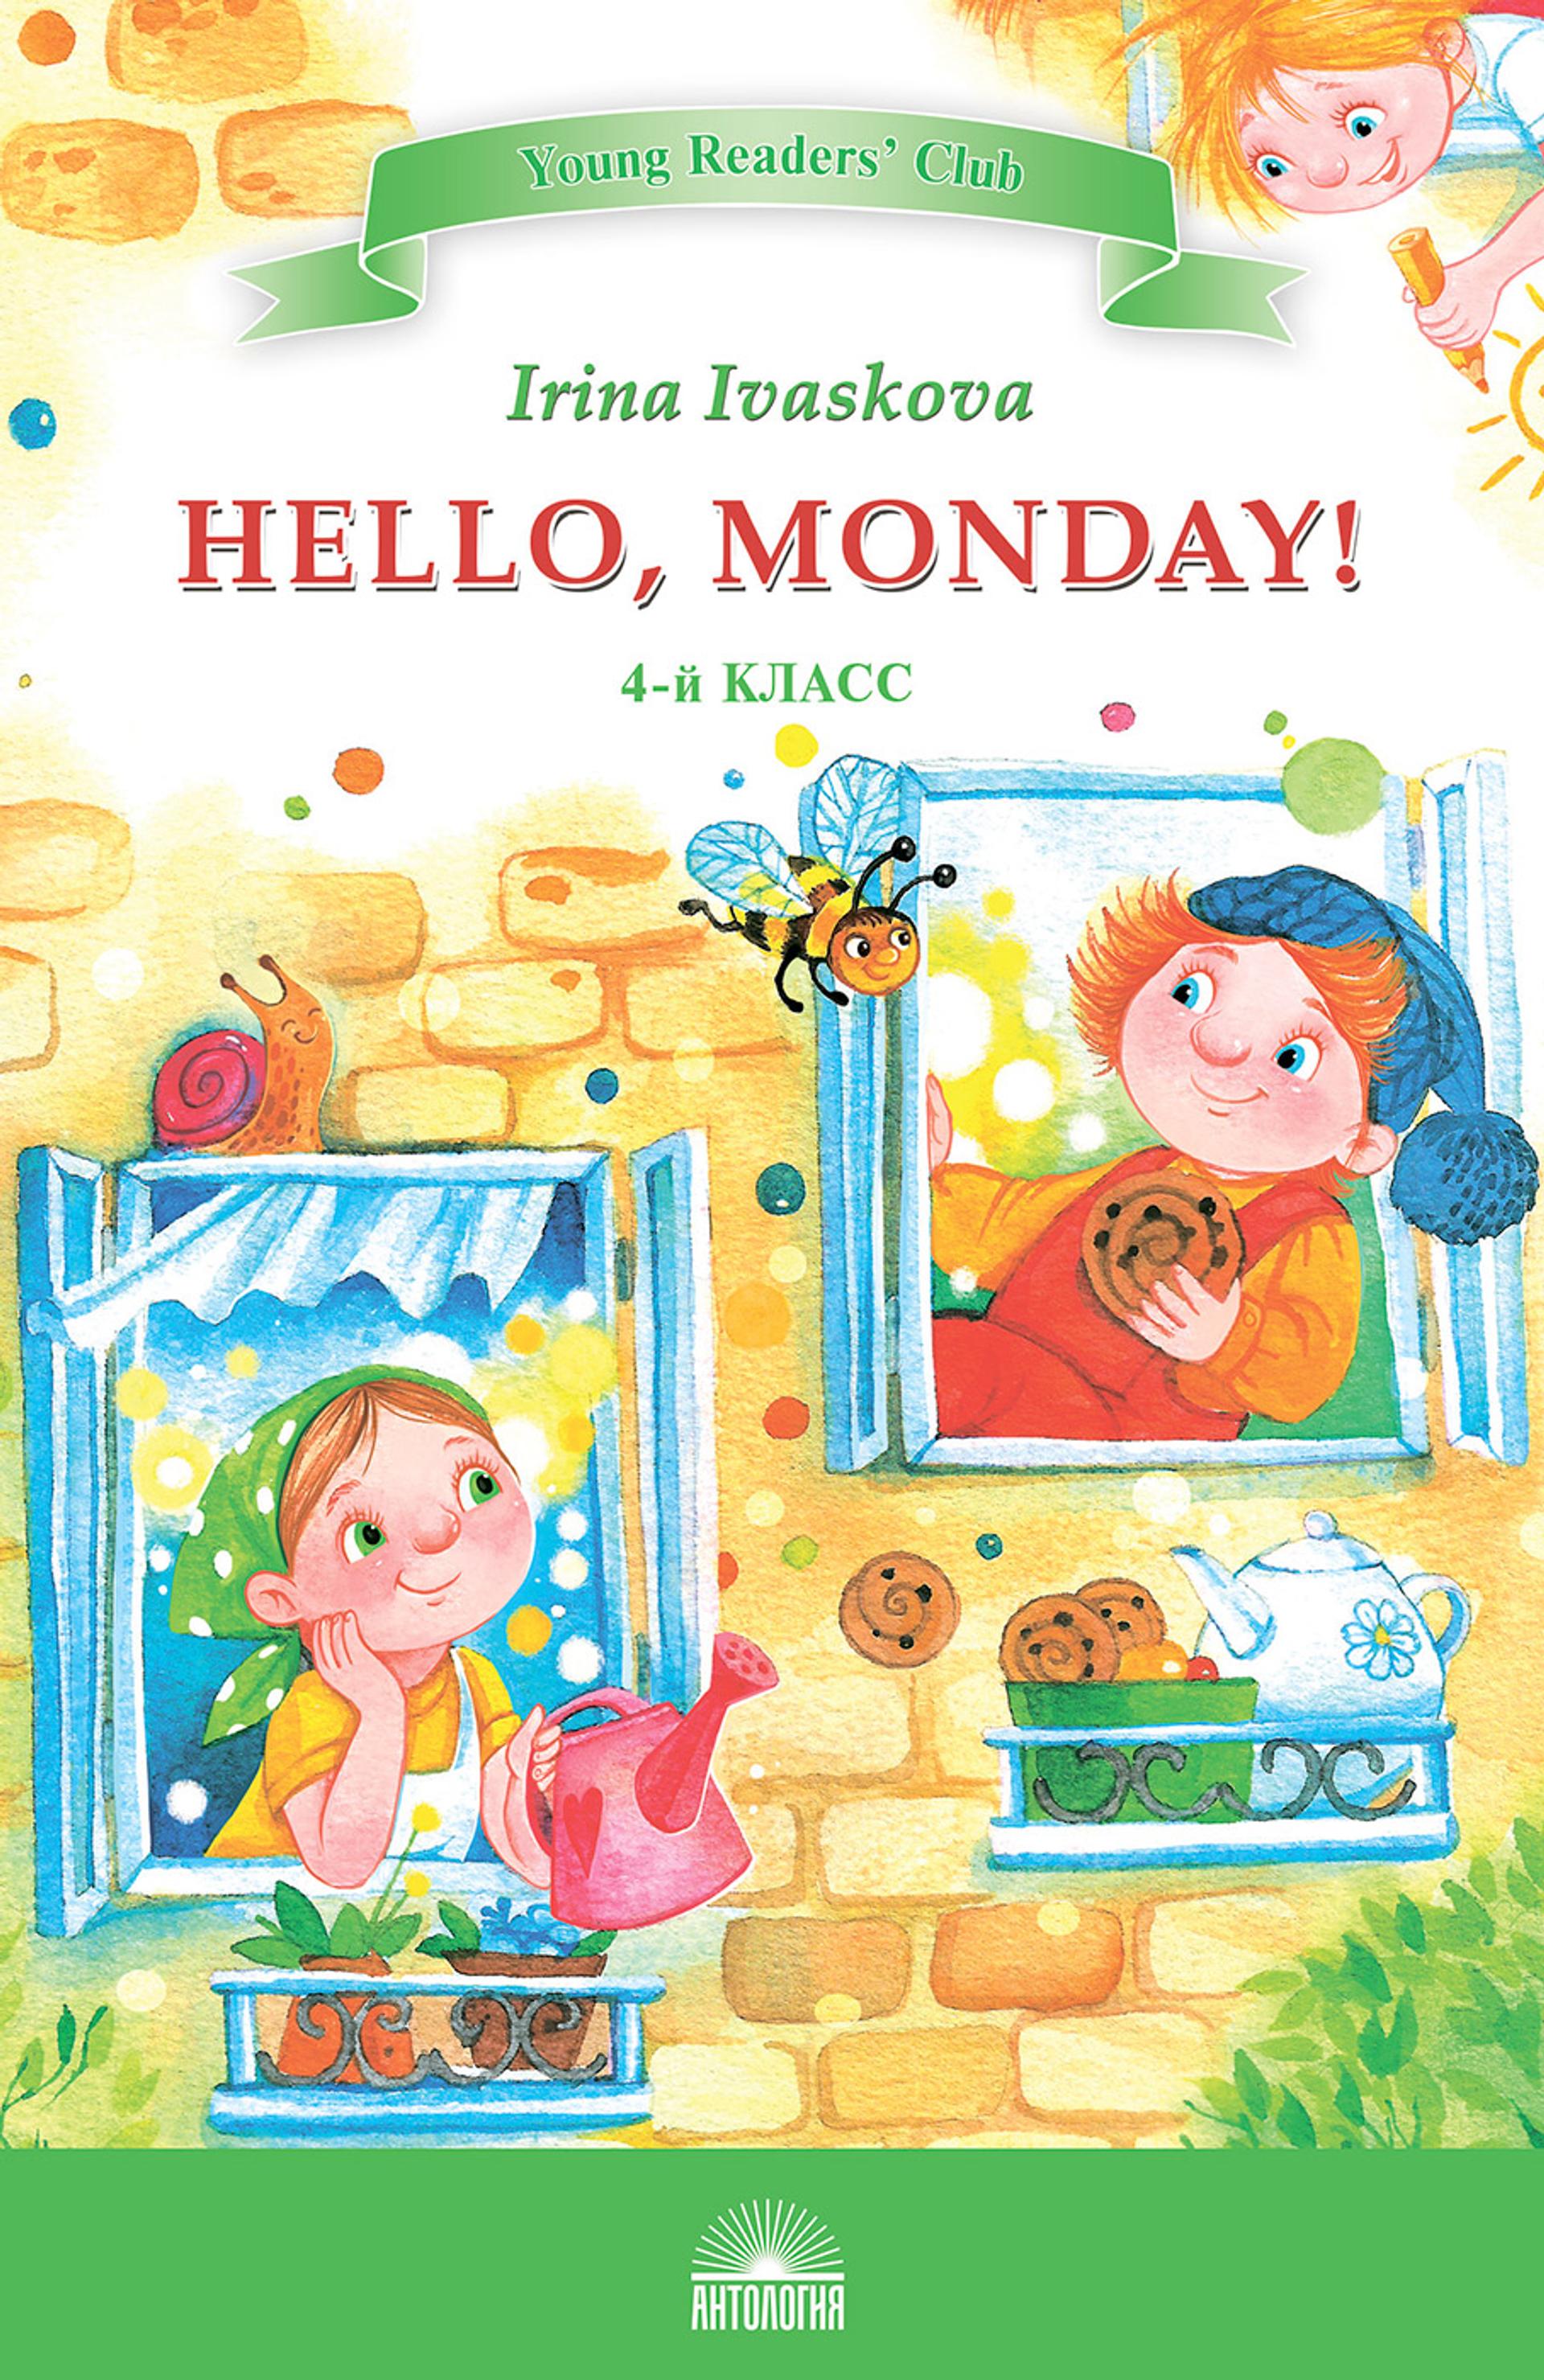 The cover of Hello, Monday!